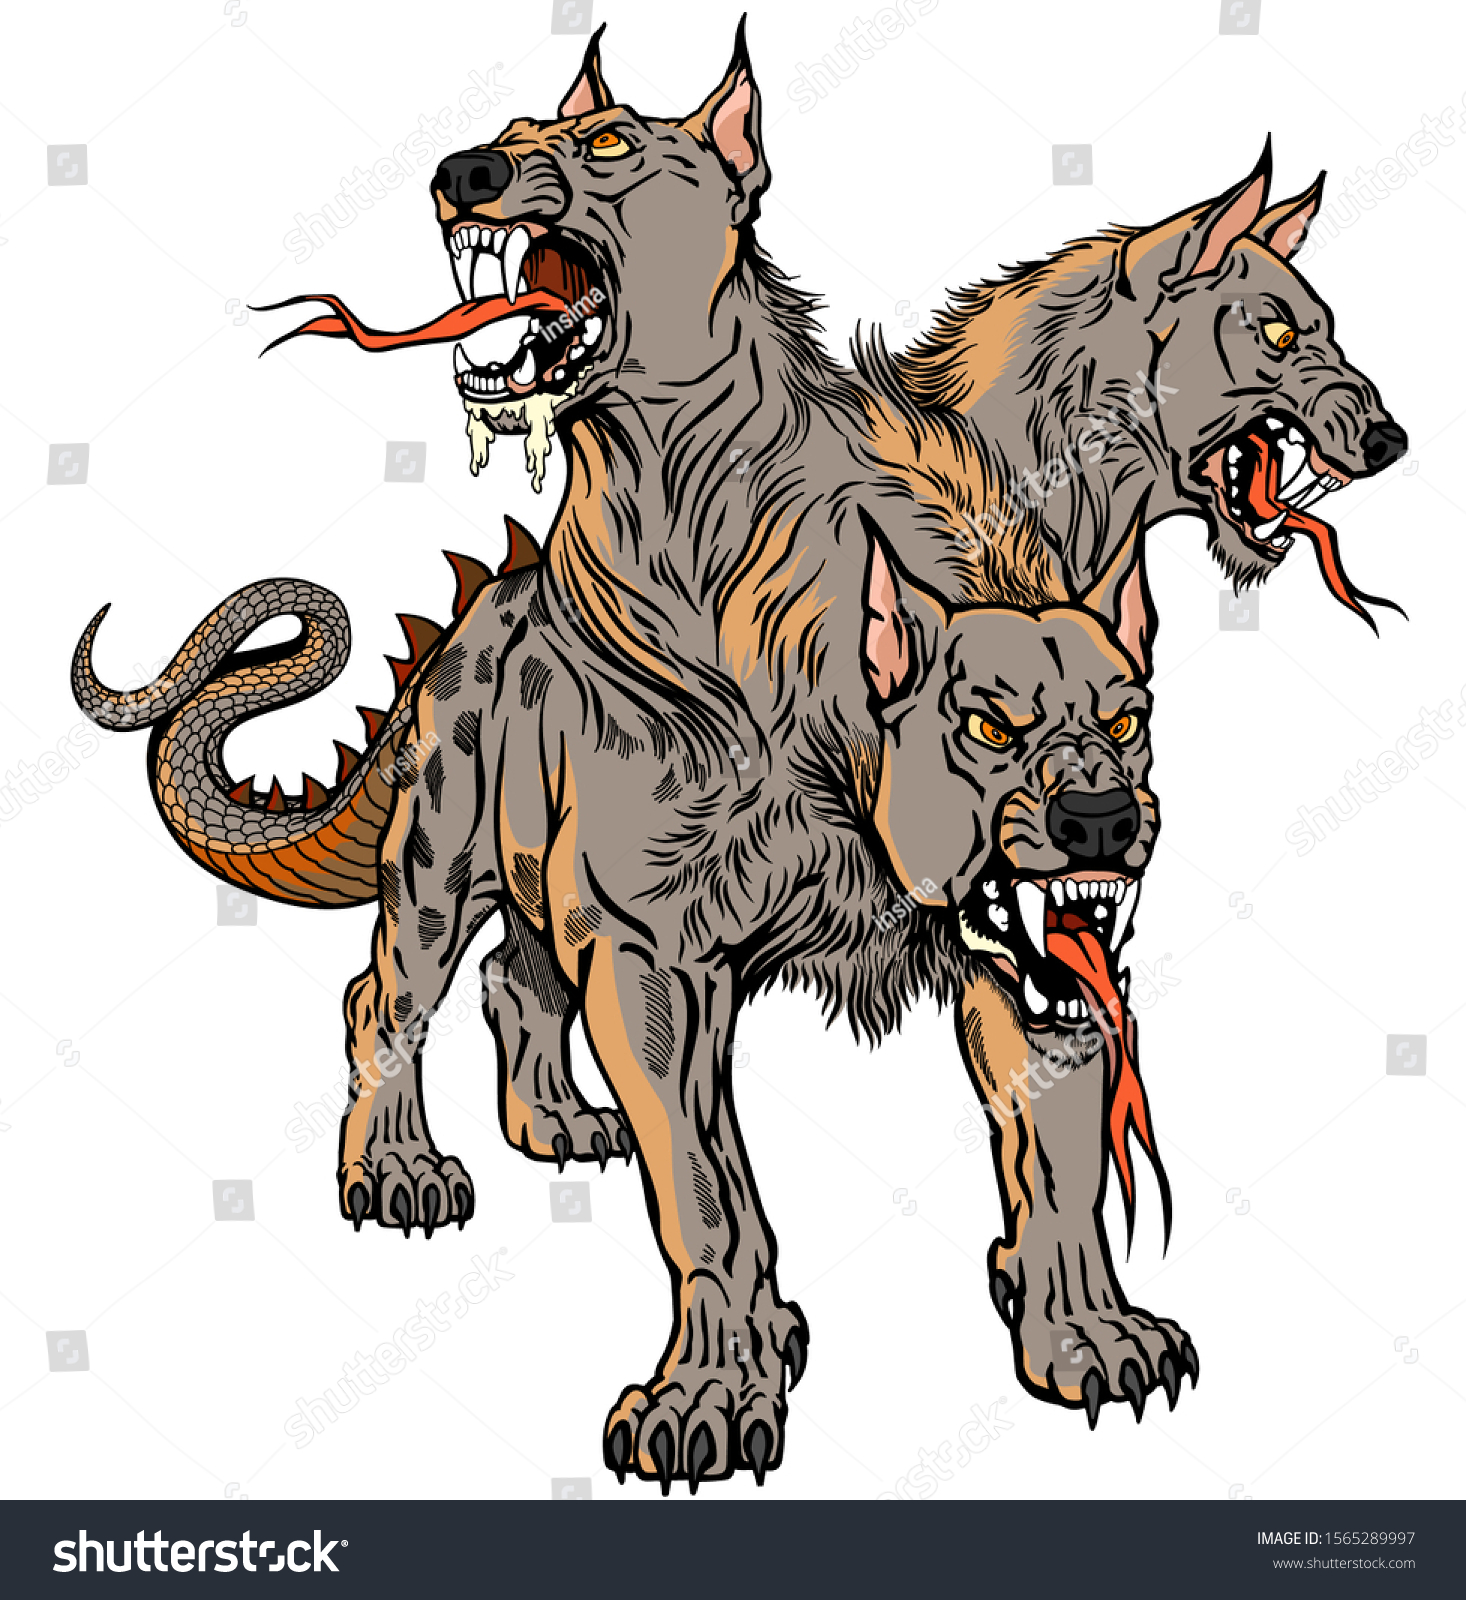 SVG of Cerberus hellhound Mythological three headed dog the guard of entrance to hell. Hound of Hades. Isolated tattoo style vector illustration svg